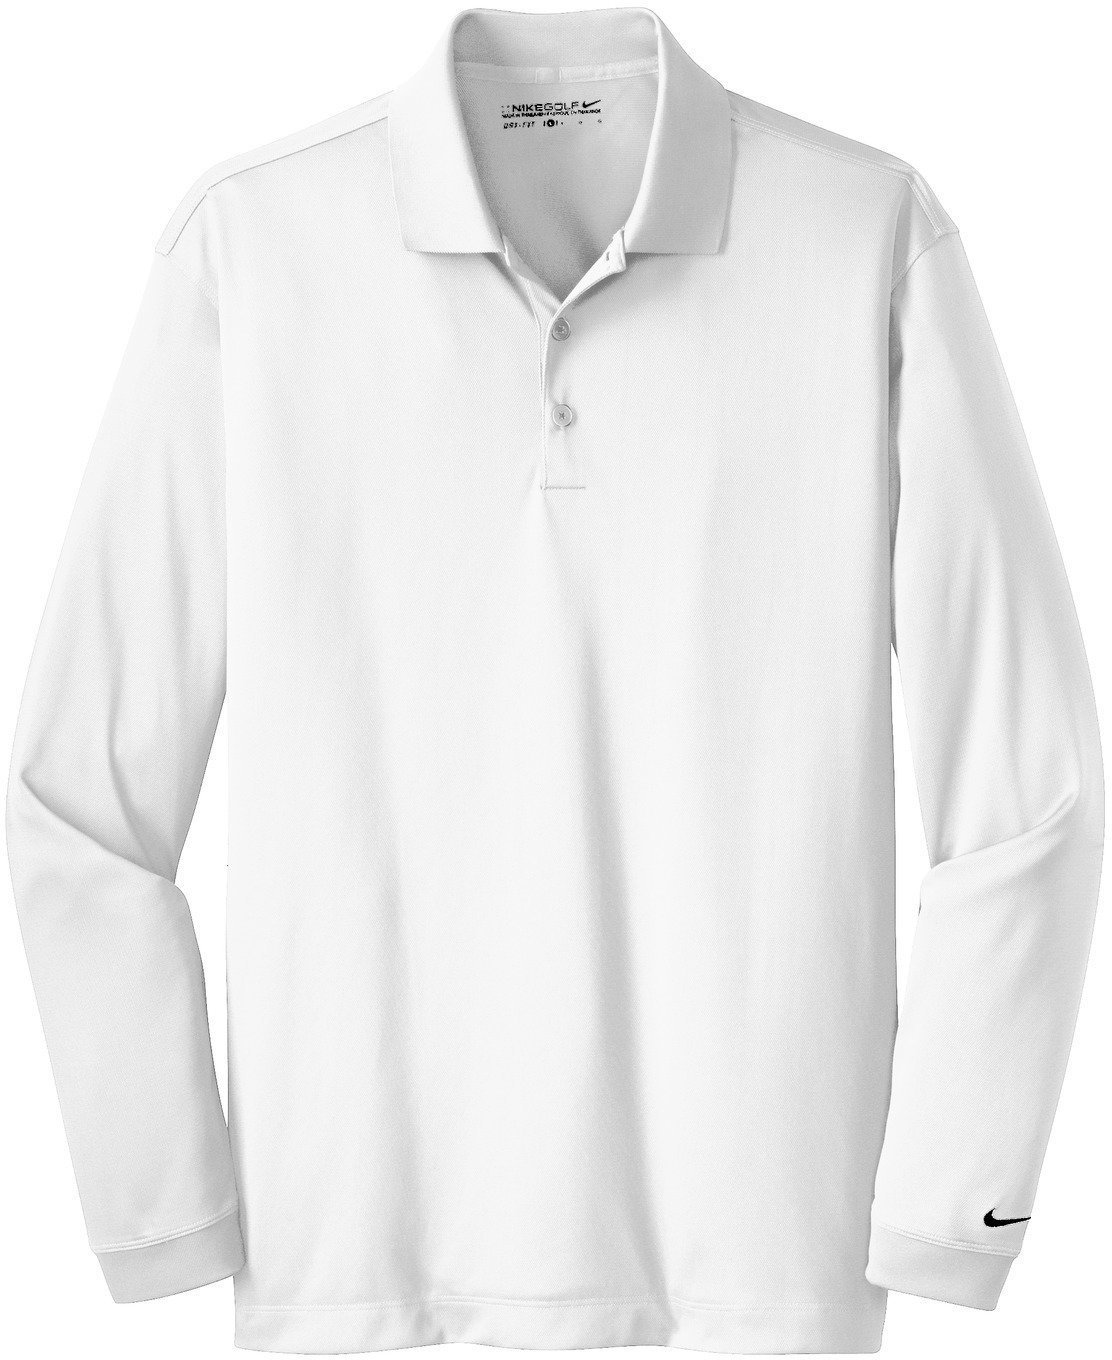 Chemise polo Nike Dry Core Polo Golf Femme Manches Longues White/Black S